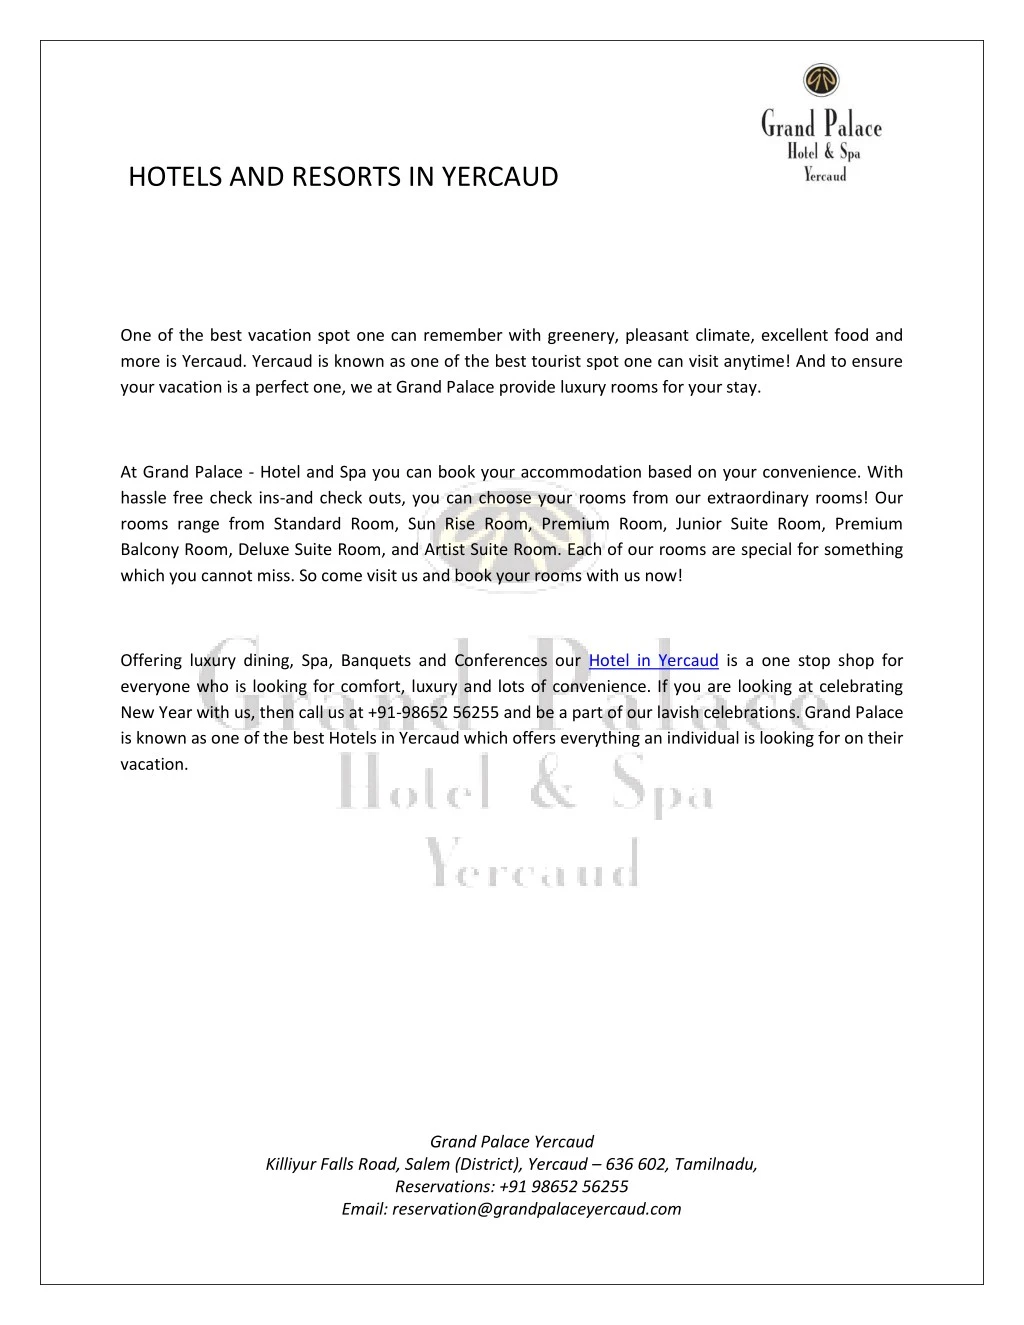 hotels and resorts in yercaud